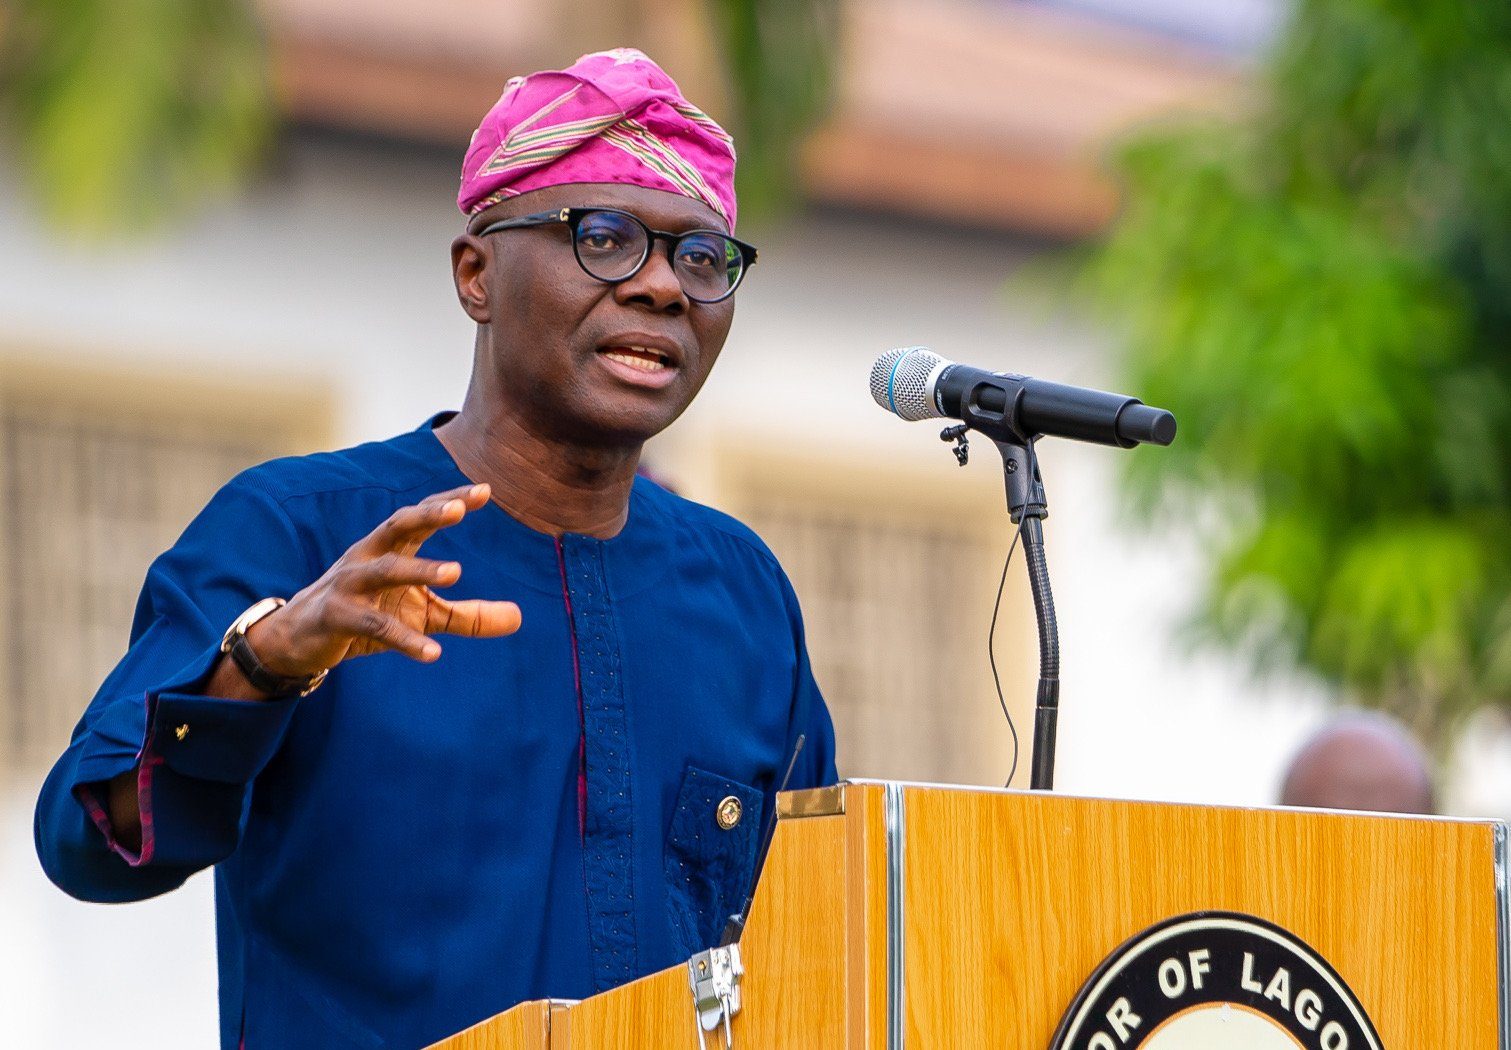 Video: We Have Not Recorded Any Fatality – Lagos State Governor Claims